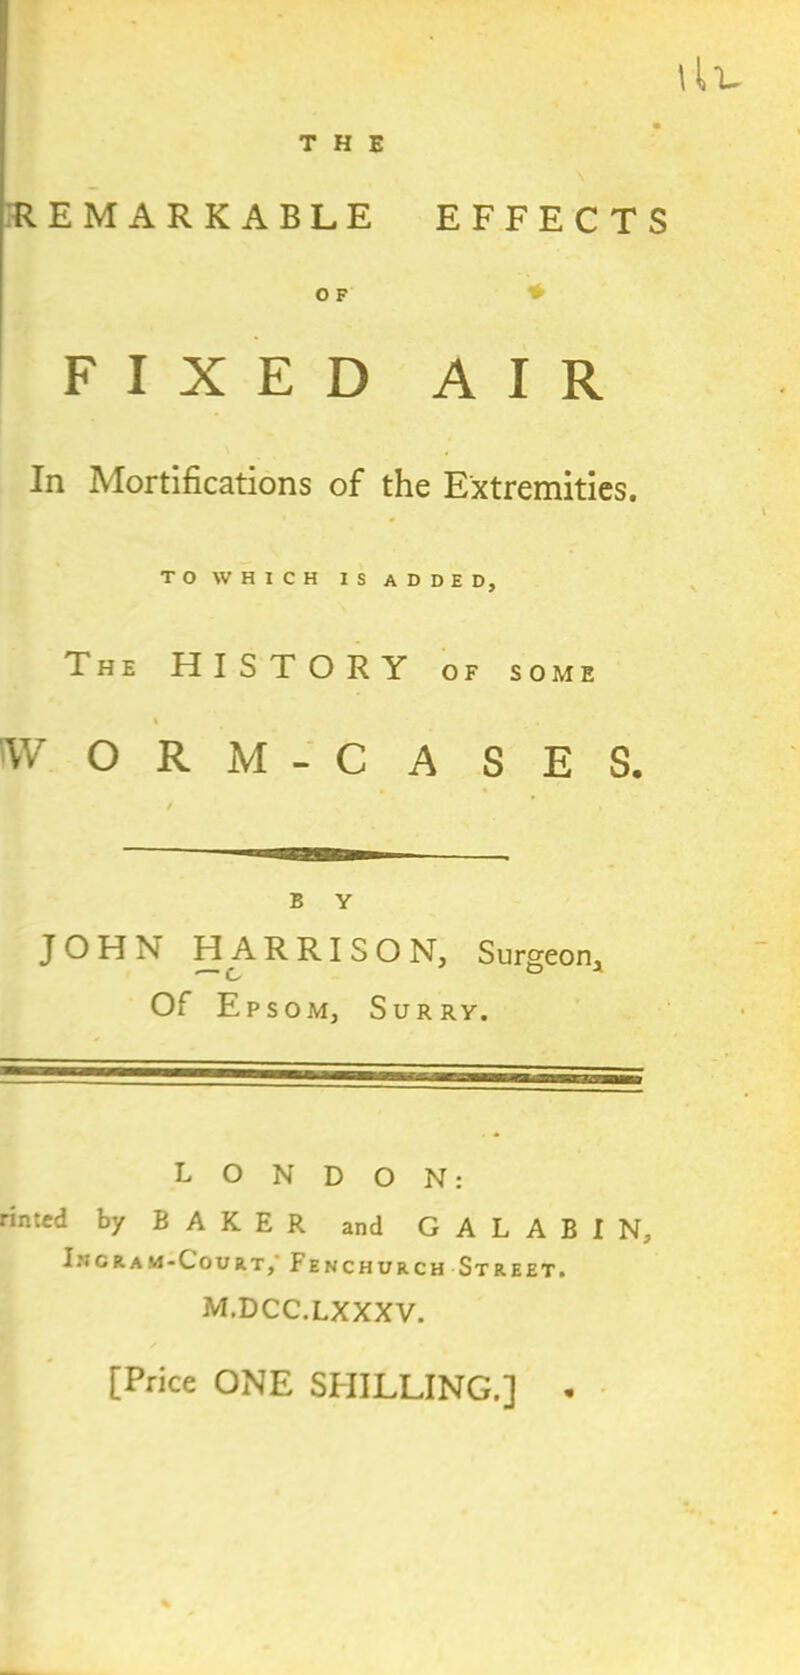 llL THE REMARKABLE EFFECTS O F FIXED AIR In Mortifications of the Extremities. TO WHICH IS ADDED, The HISTORY of so ME Vv' ORM-CA SES. B Y JOHN HARRISON, Surgeon, • C 0 3 Of Epsom, Surry. LONDON: rinted by BAKER and G A L A B I N, Iscram-Court,' Fenchurch Street. m.dcc.lxxxv. [Price ONE SHILLING.] .